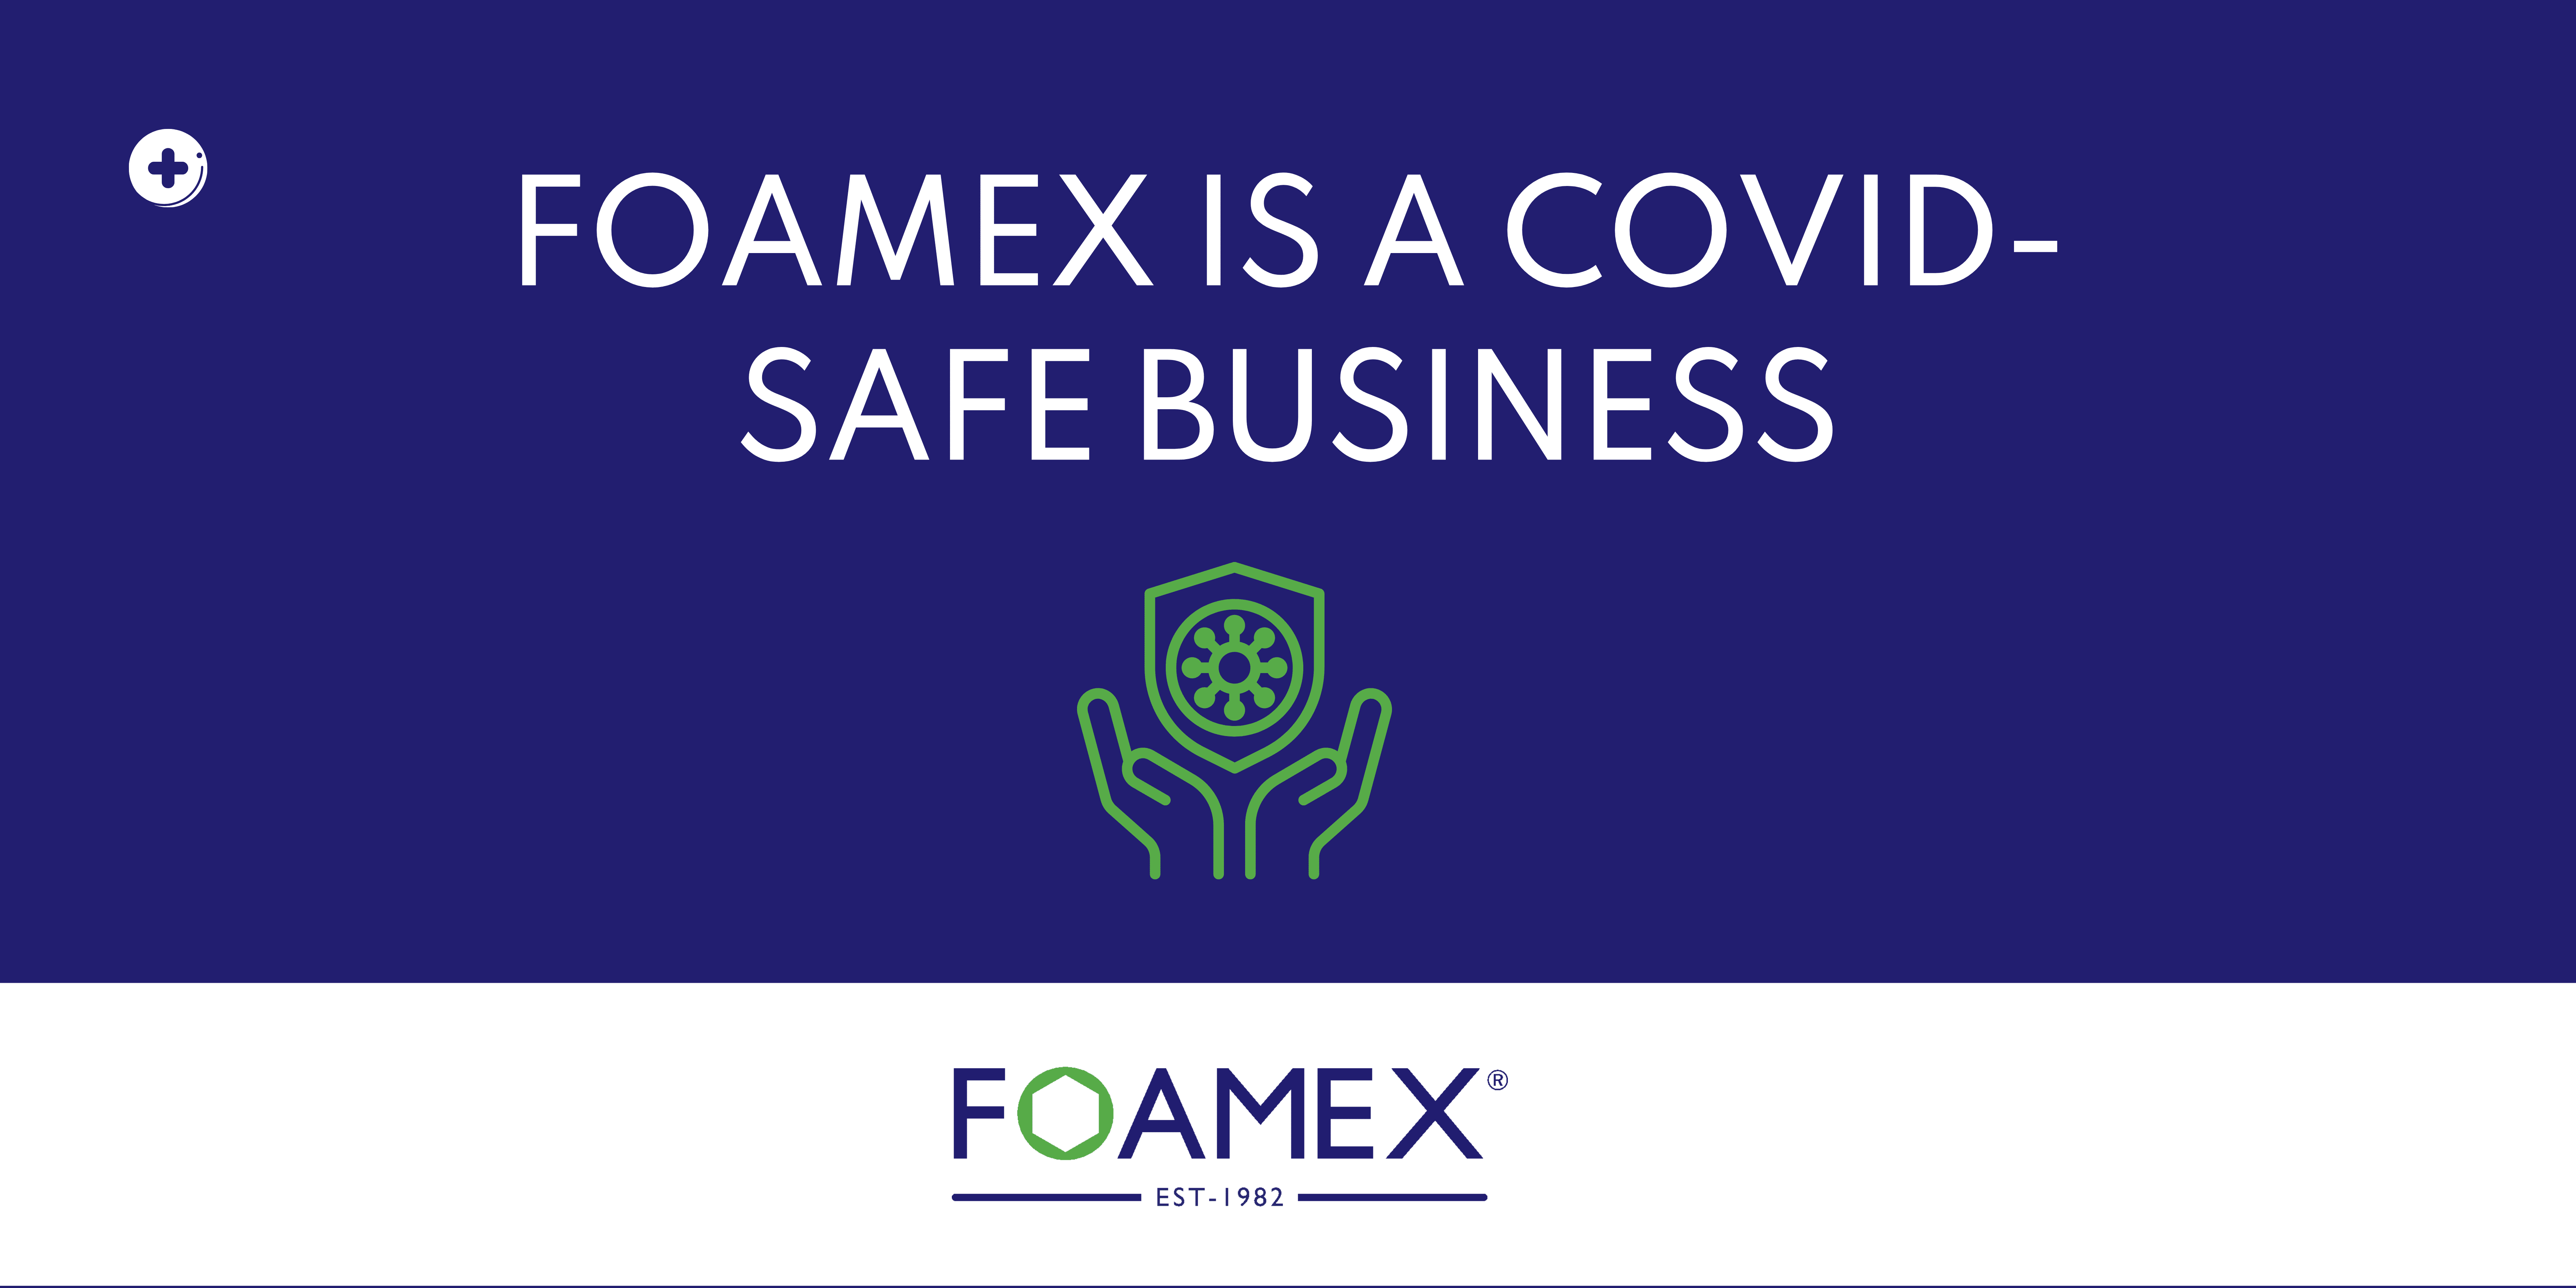 FOAMEX IS A COVID SAFE BUSINESS